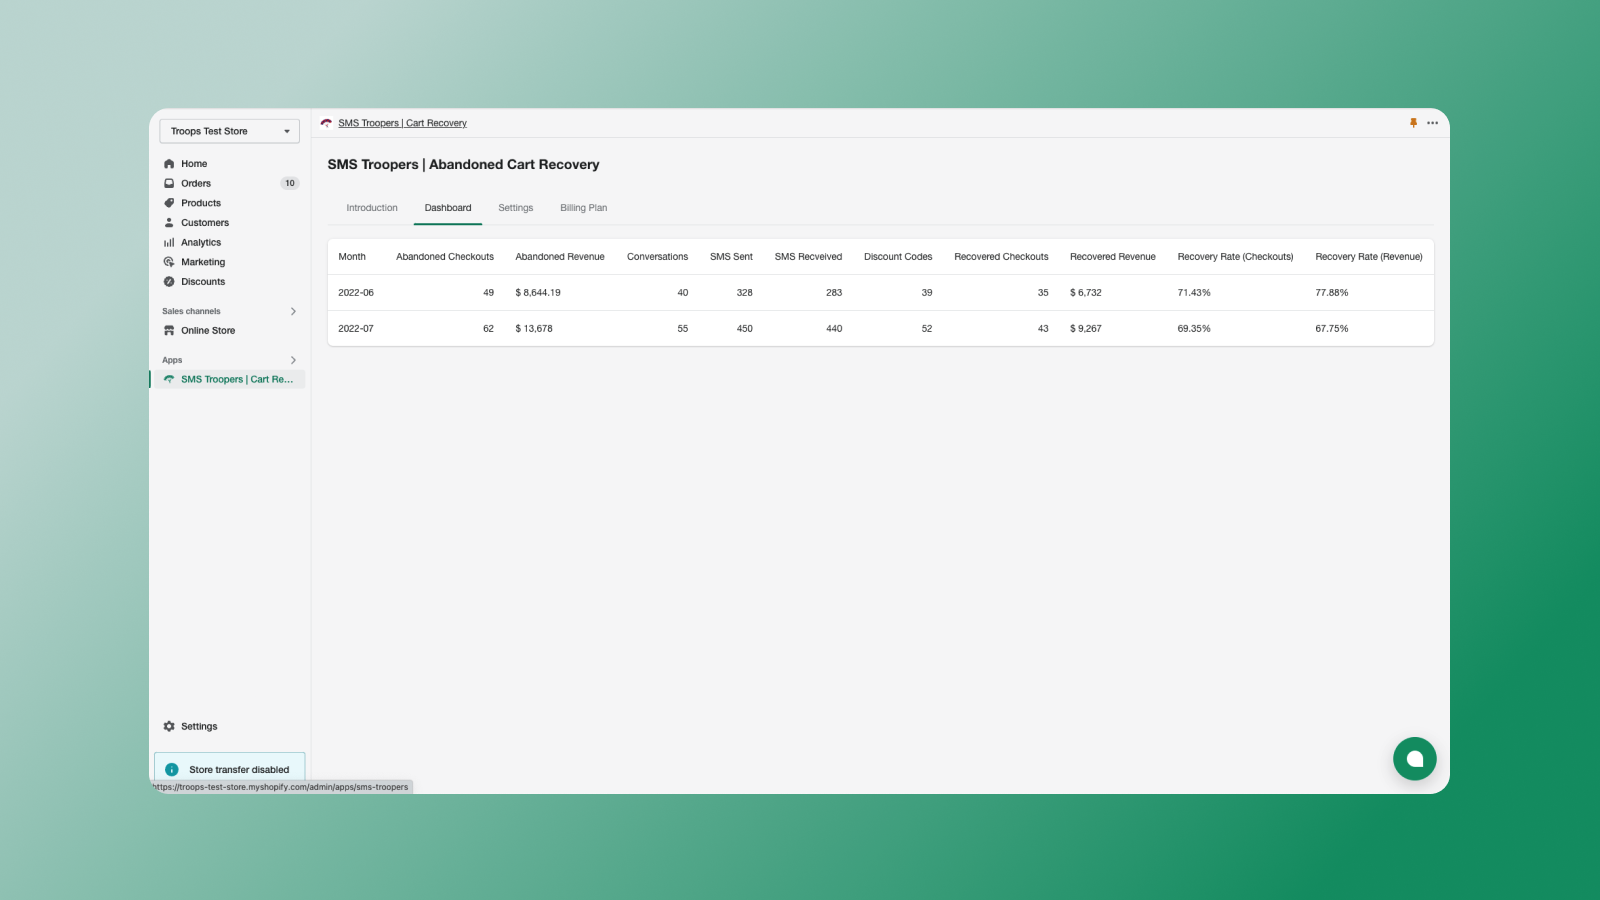 Dashboard to track the recovered revenue